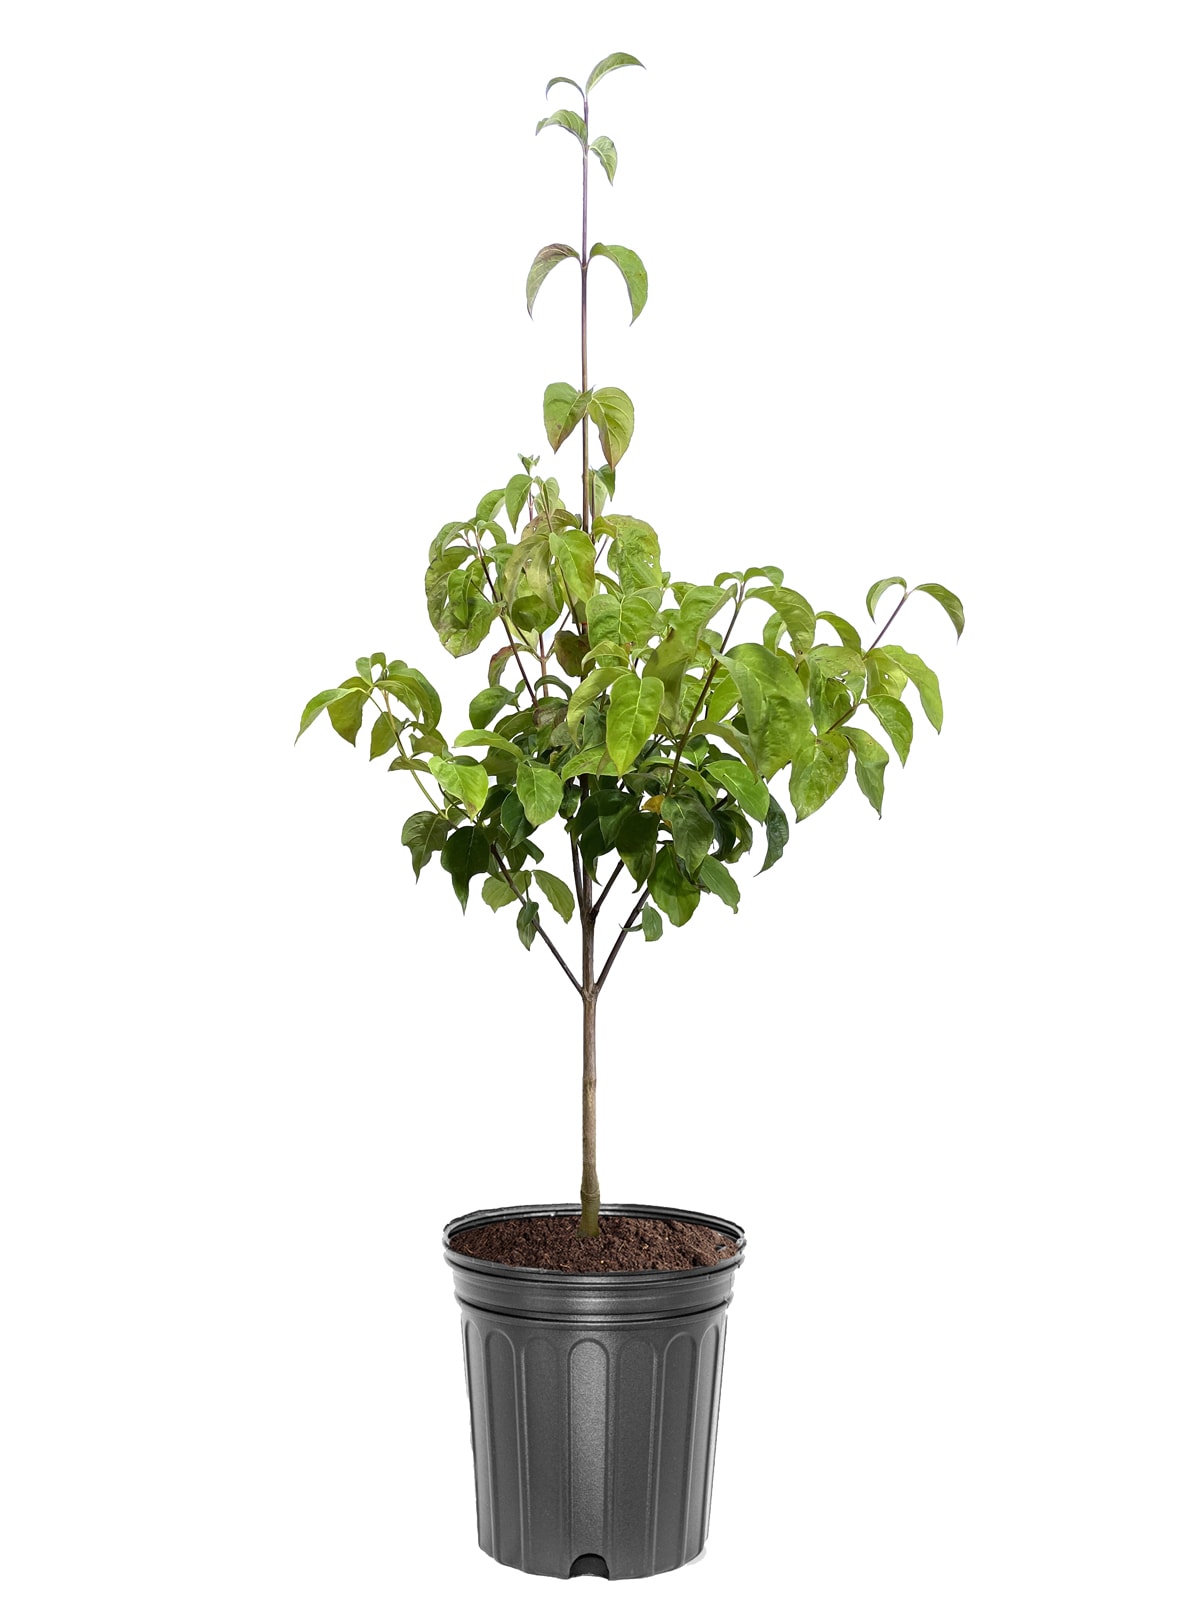 Online Orchards Granny Smith Apple Tree Bare Root FTAP003 - The Home Depot